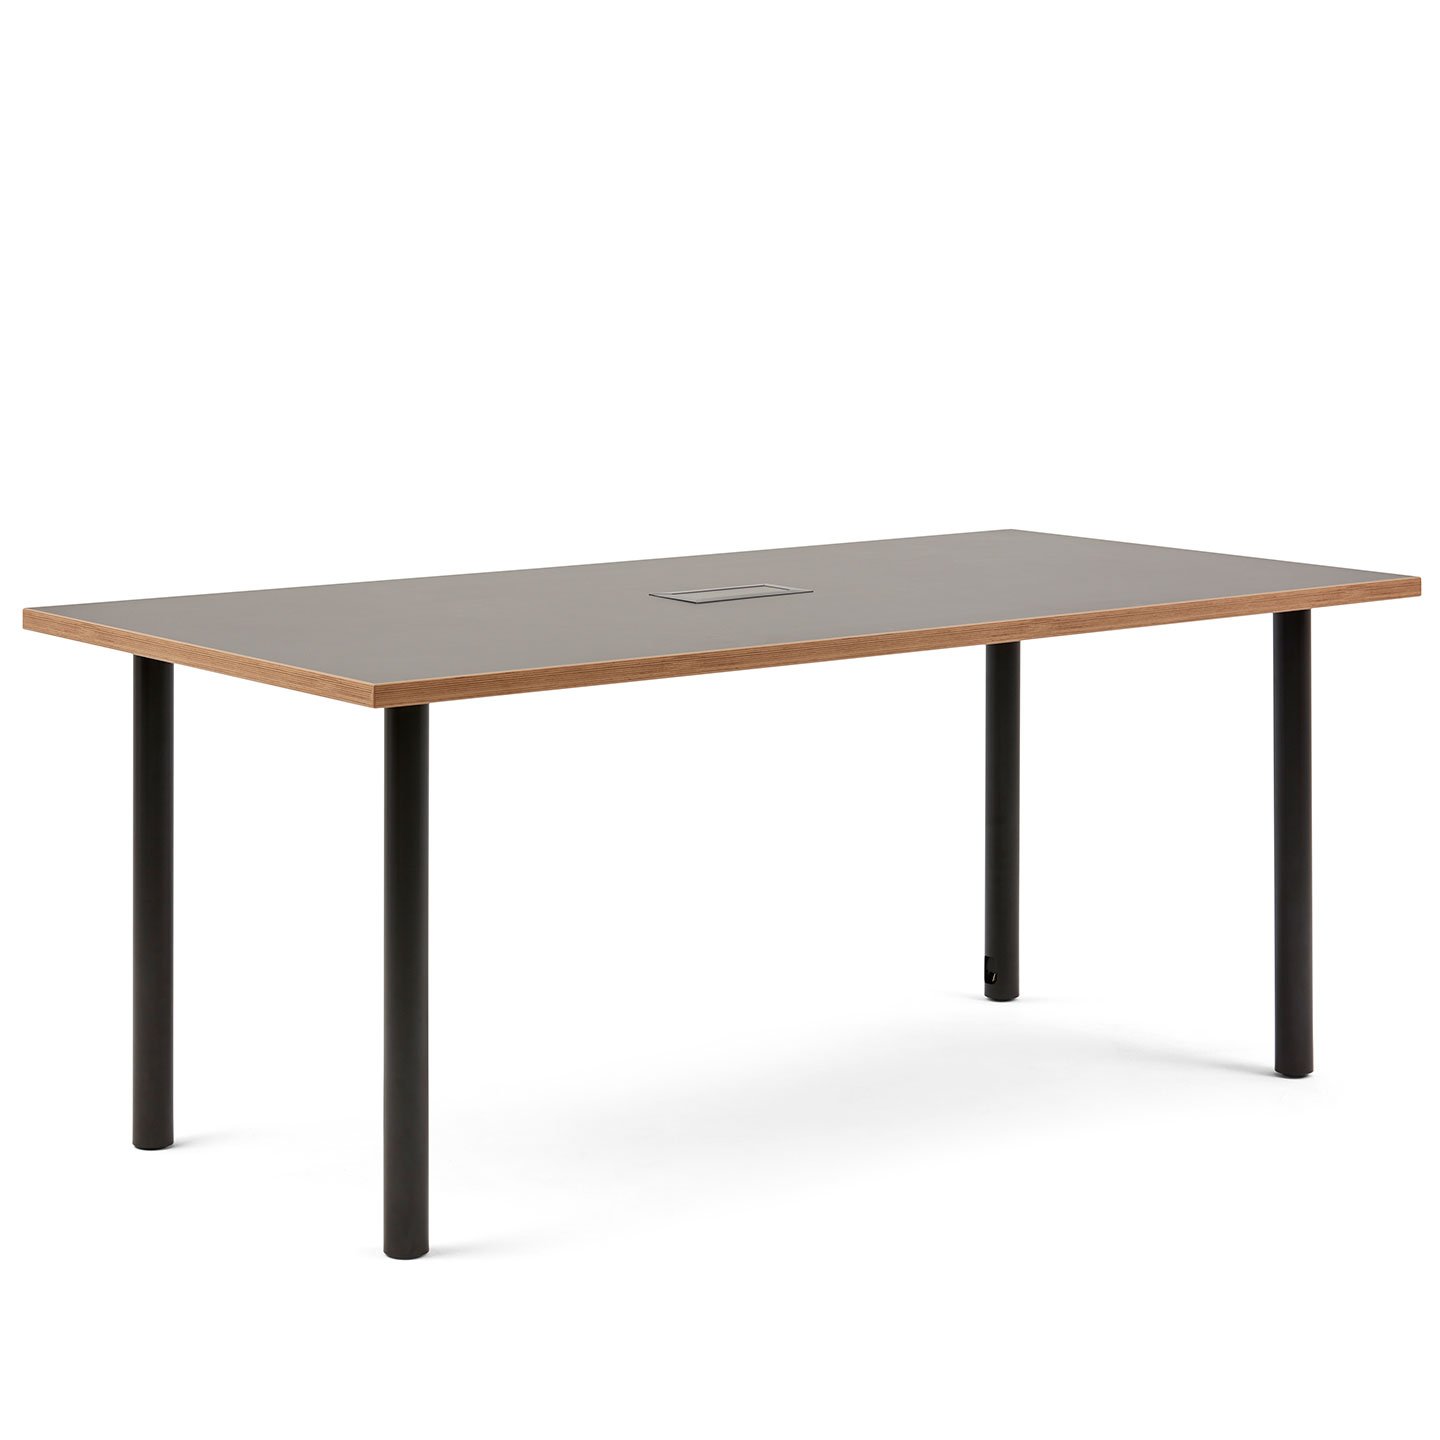 Haworth Jive Whitesweep table with rectangular top and 4 black legs with cord organizer